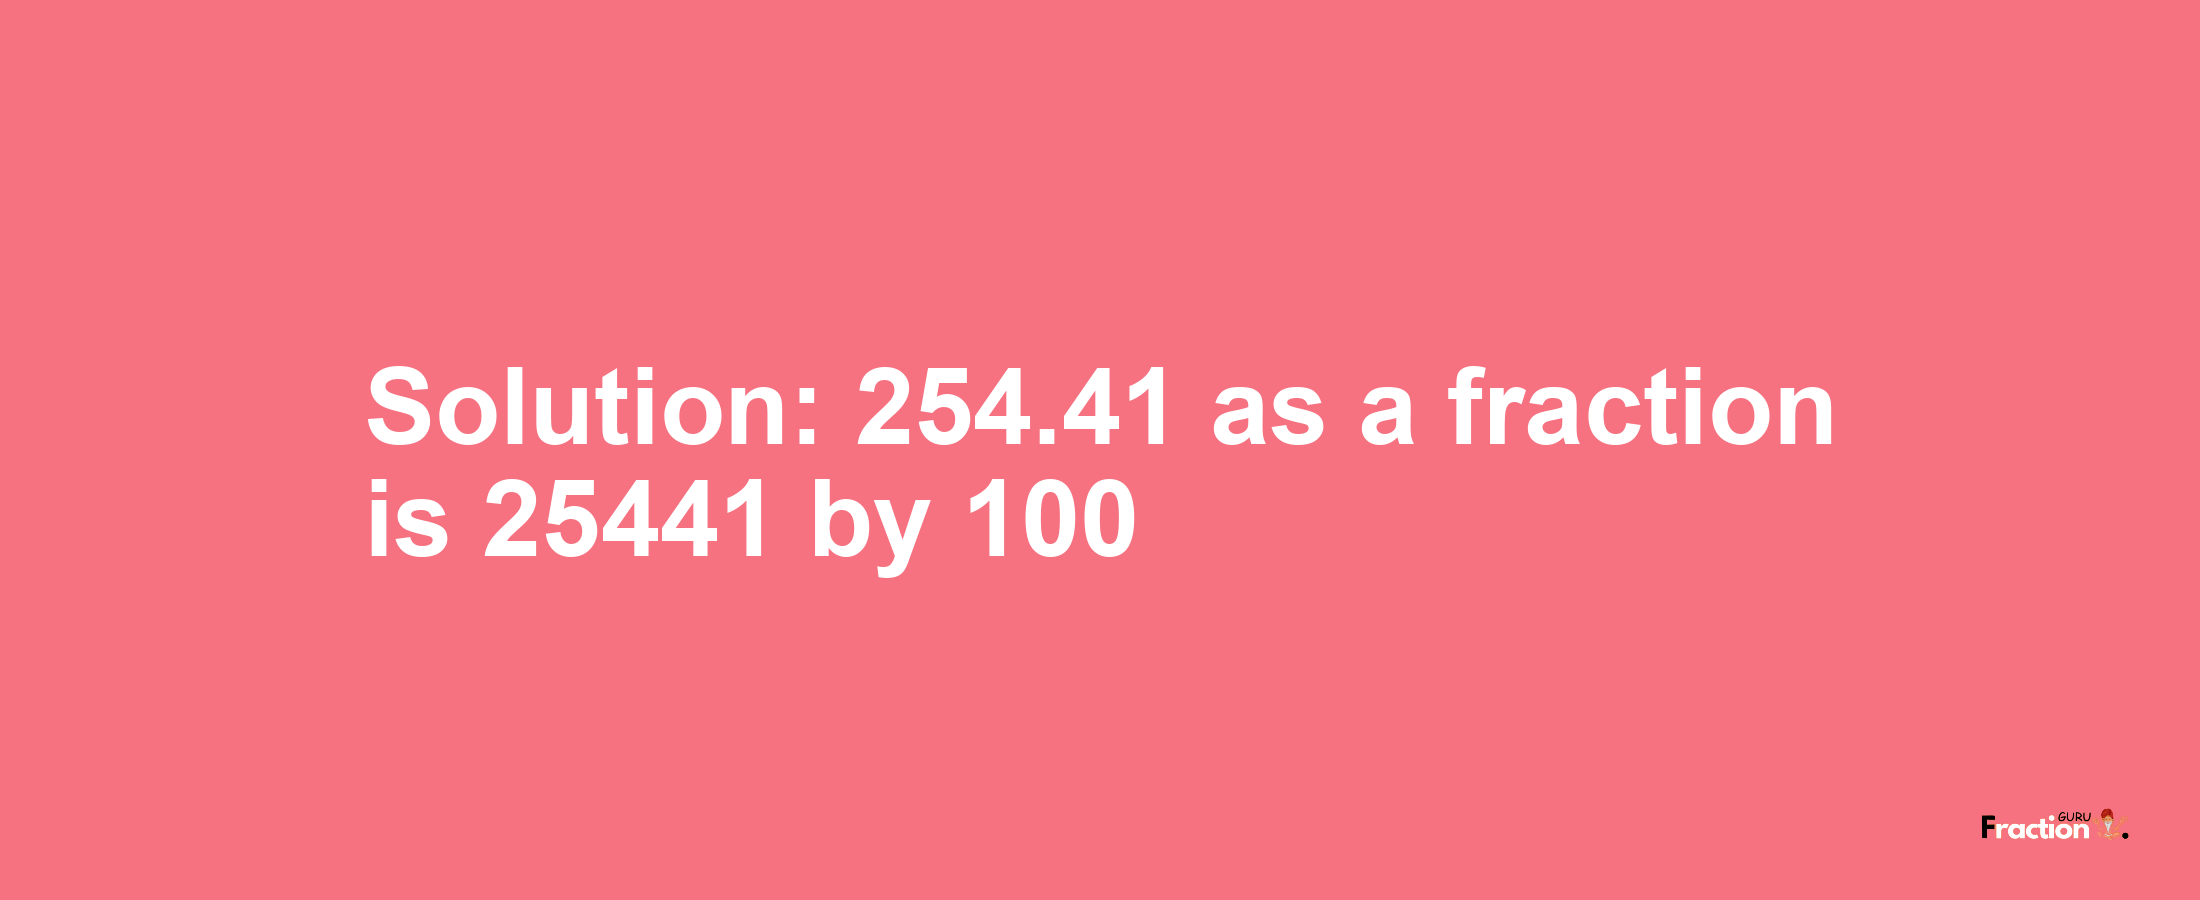 Solution:254.41 as a fraction is 25441/100